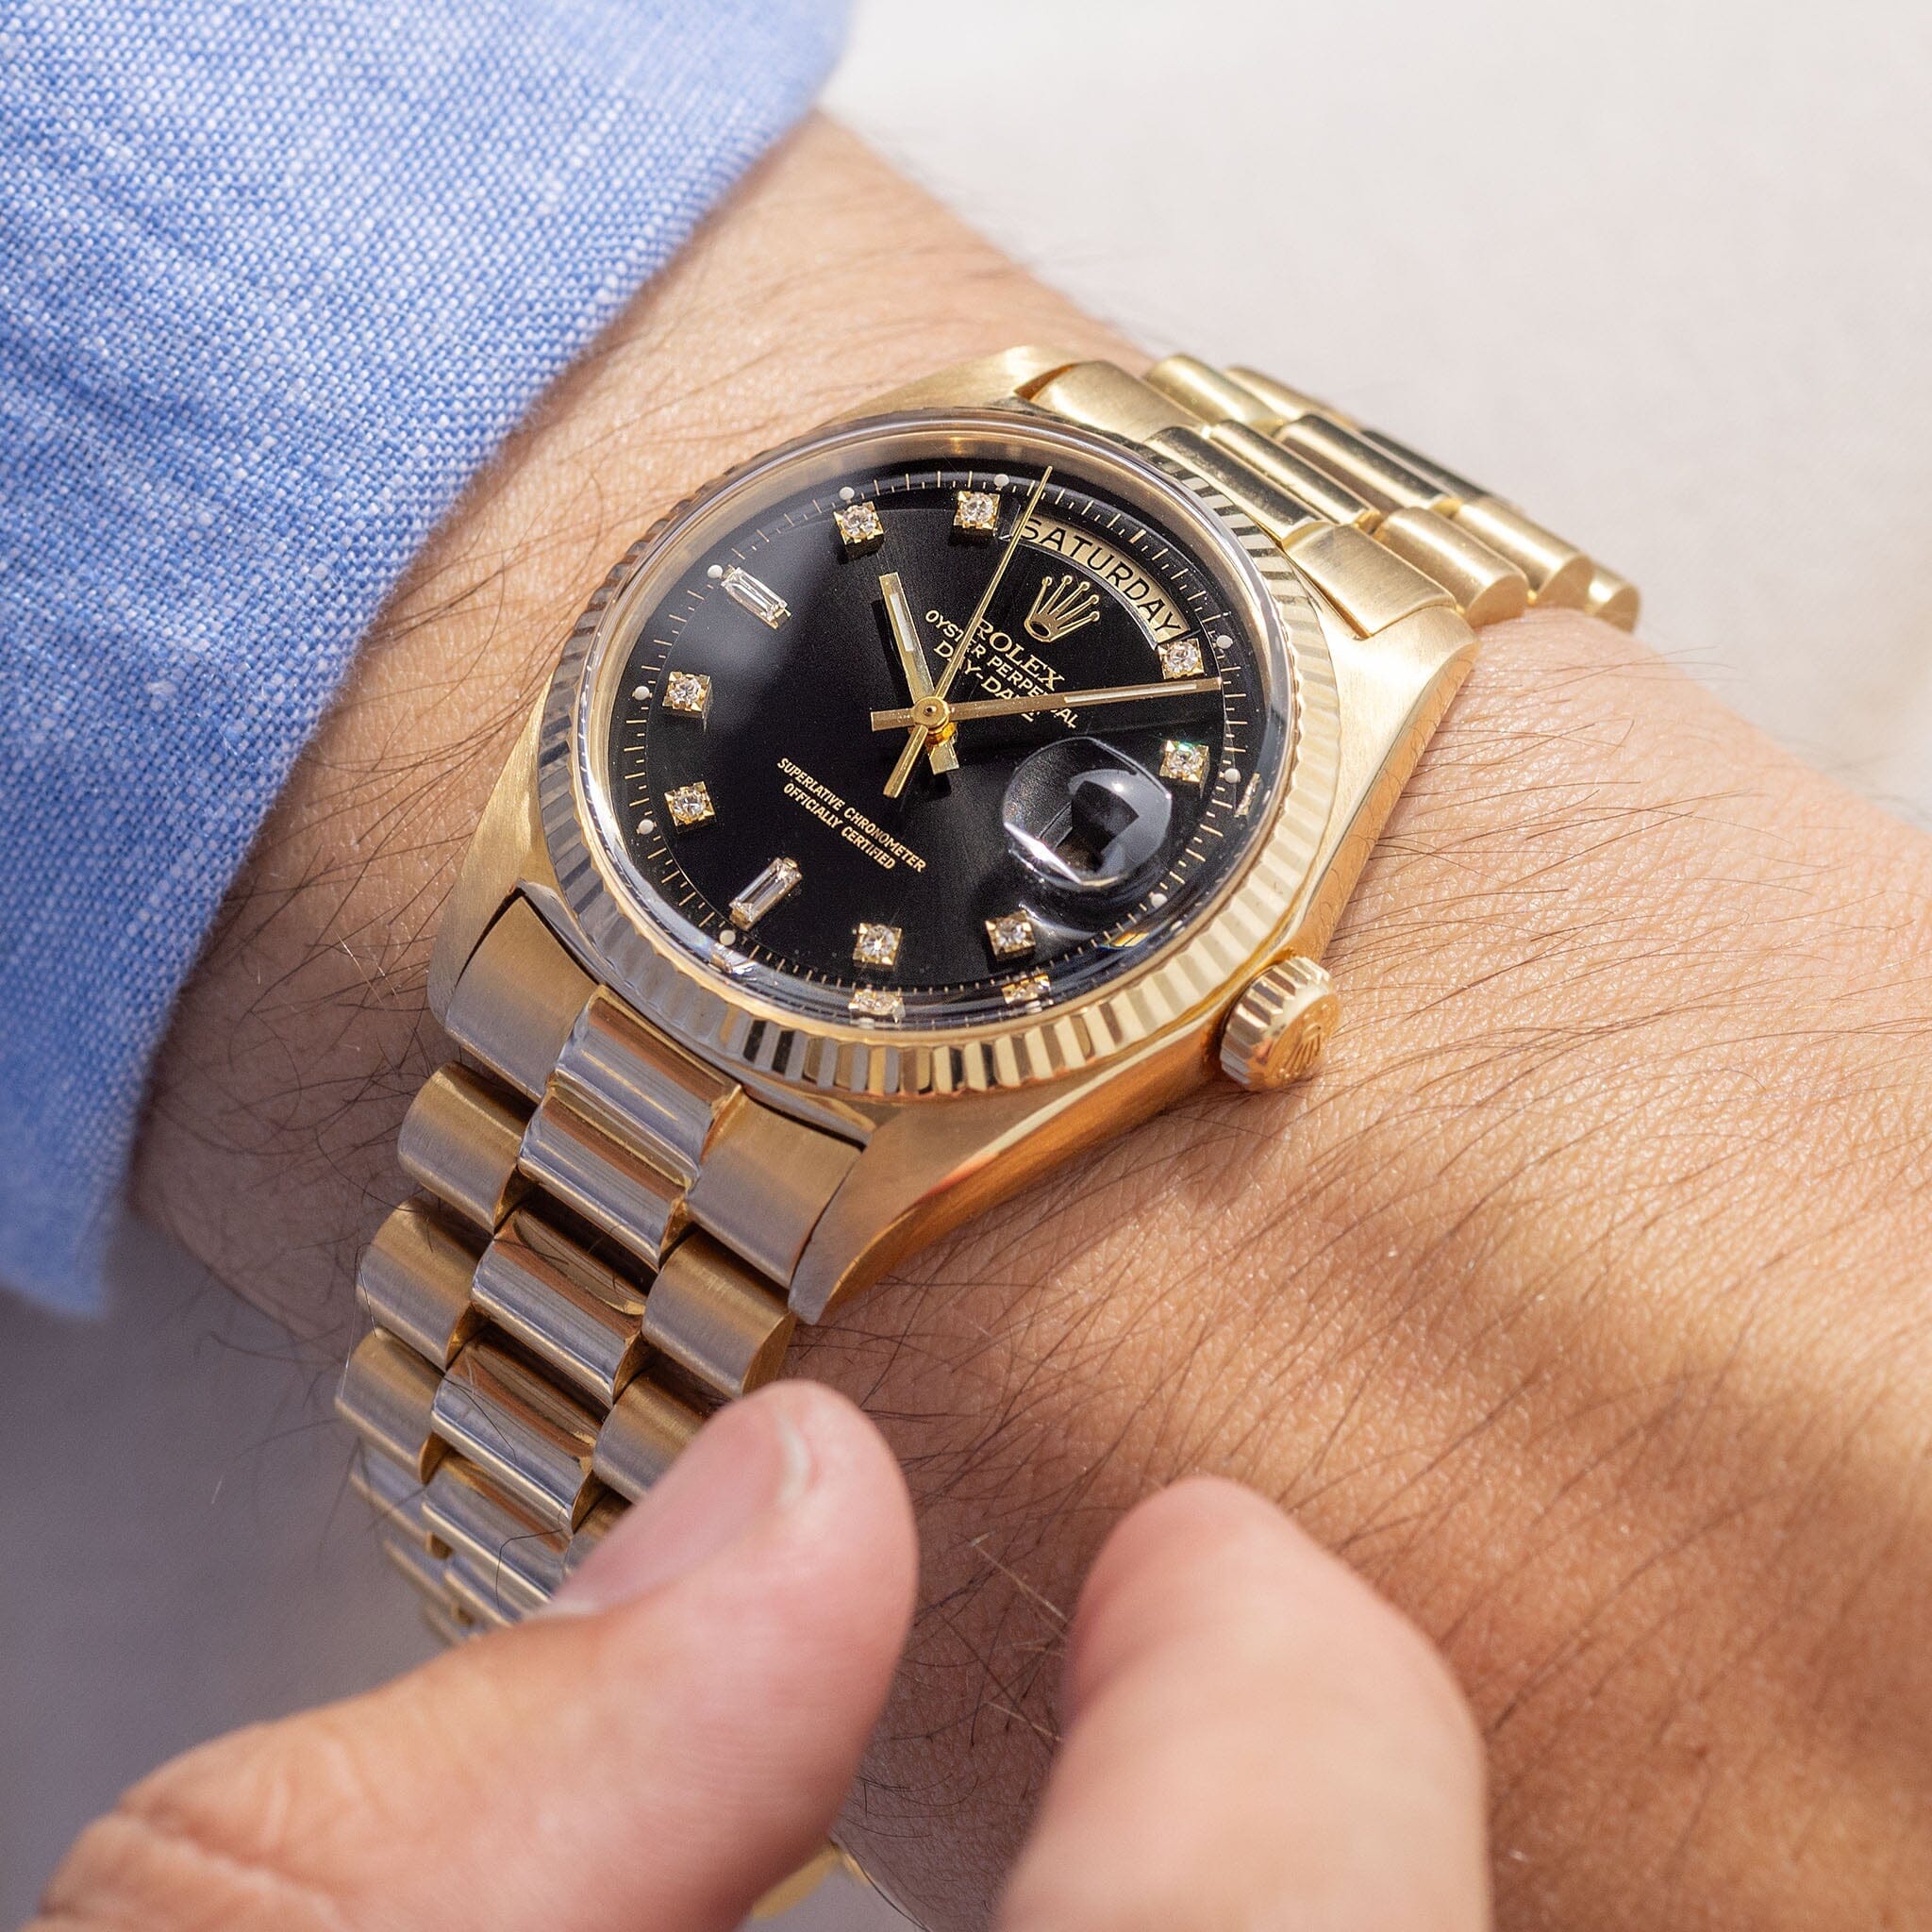 Rolex Day-Date Yellow Gold Black Diamond Hours Dial ref 1803Rolex Day-Date Yellow Gold Black Diamond Hours Dial ref 1803